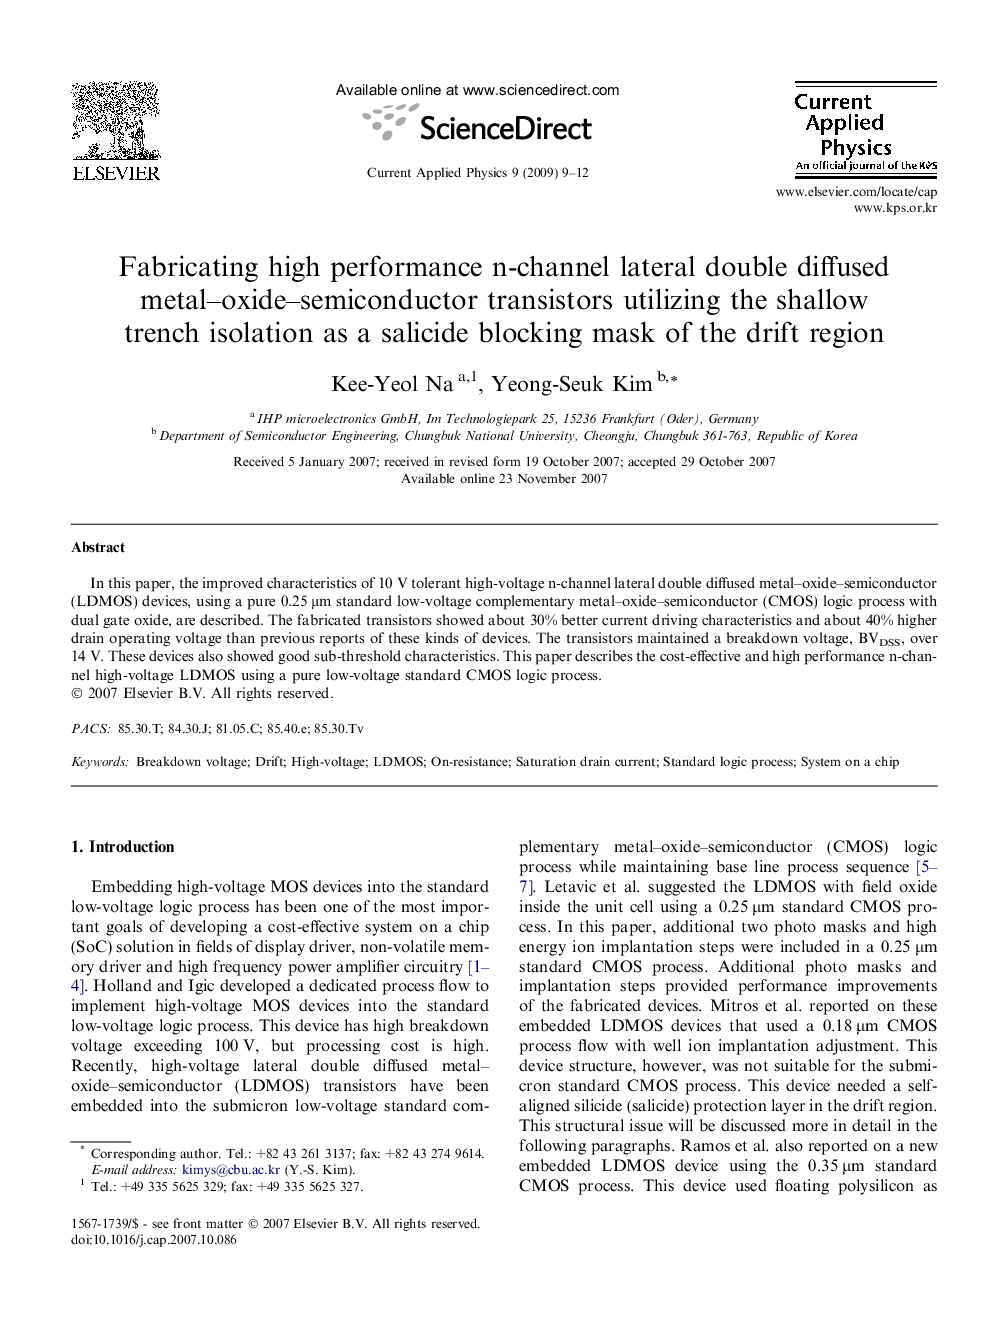 Fabricating high performance n-channel lateral double diffused metal–oxide–semiconductor transistors utilizing the shallow trench isolation as a salicide blocking mask of the drift region